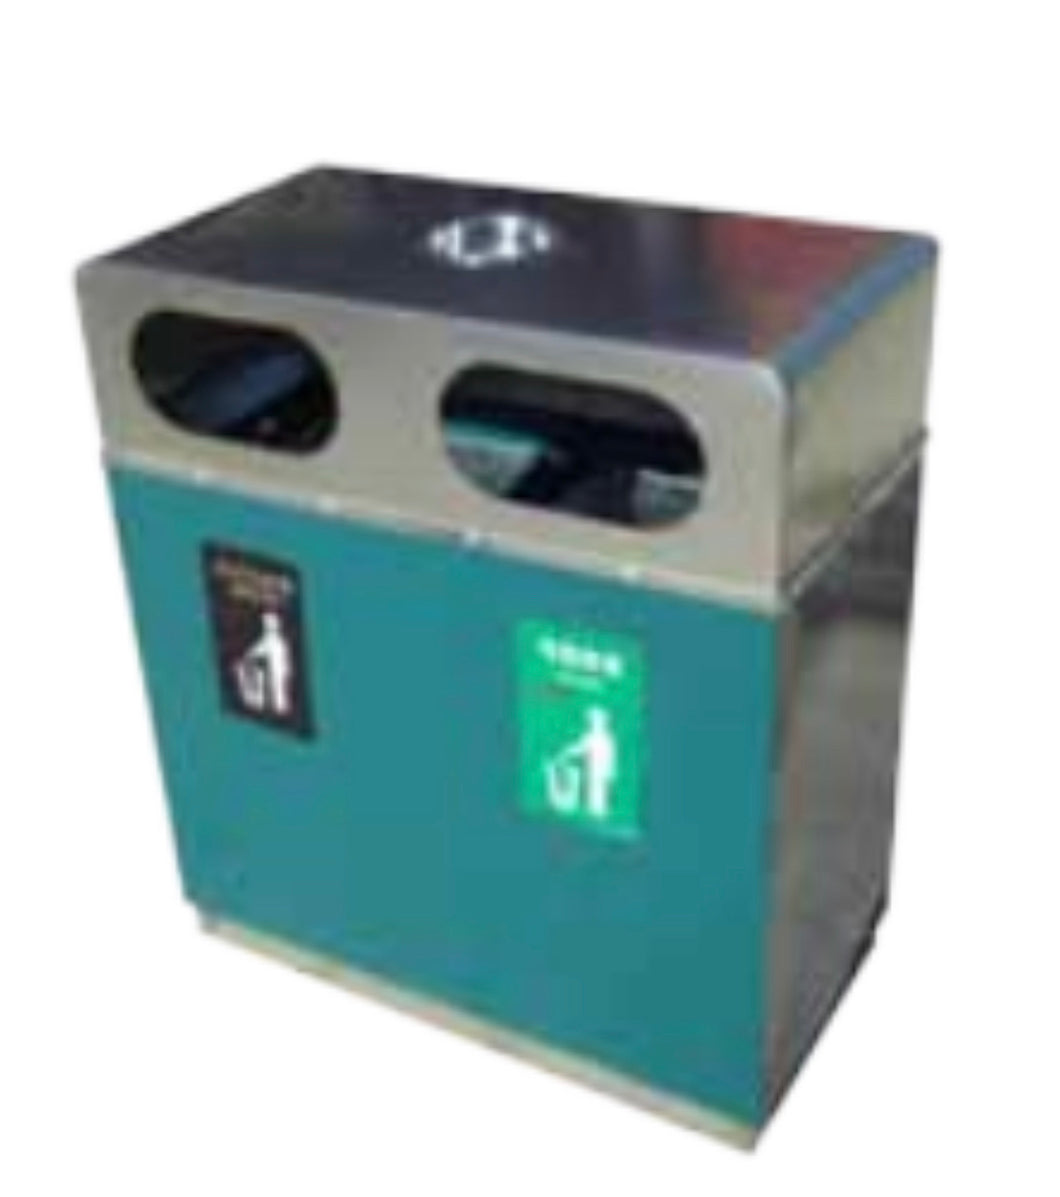 Park Trash Can / Waste Receptacle / Recycling Bin (Rectangular)